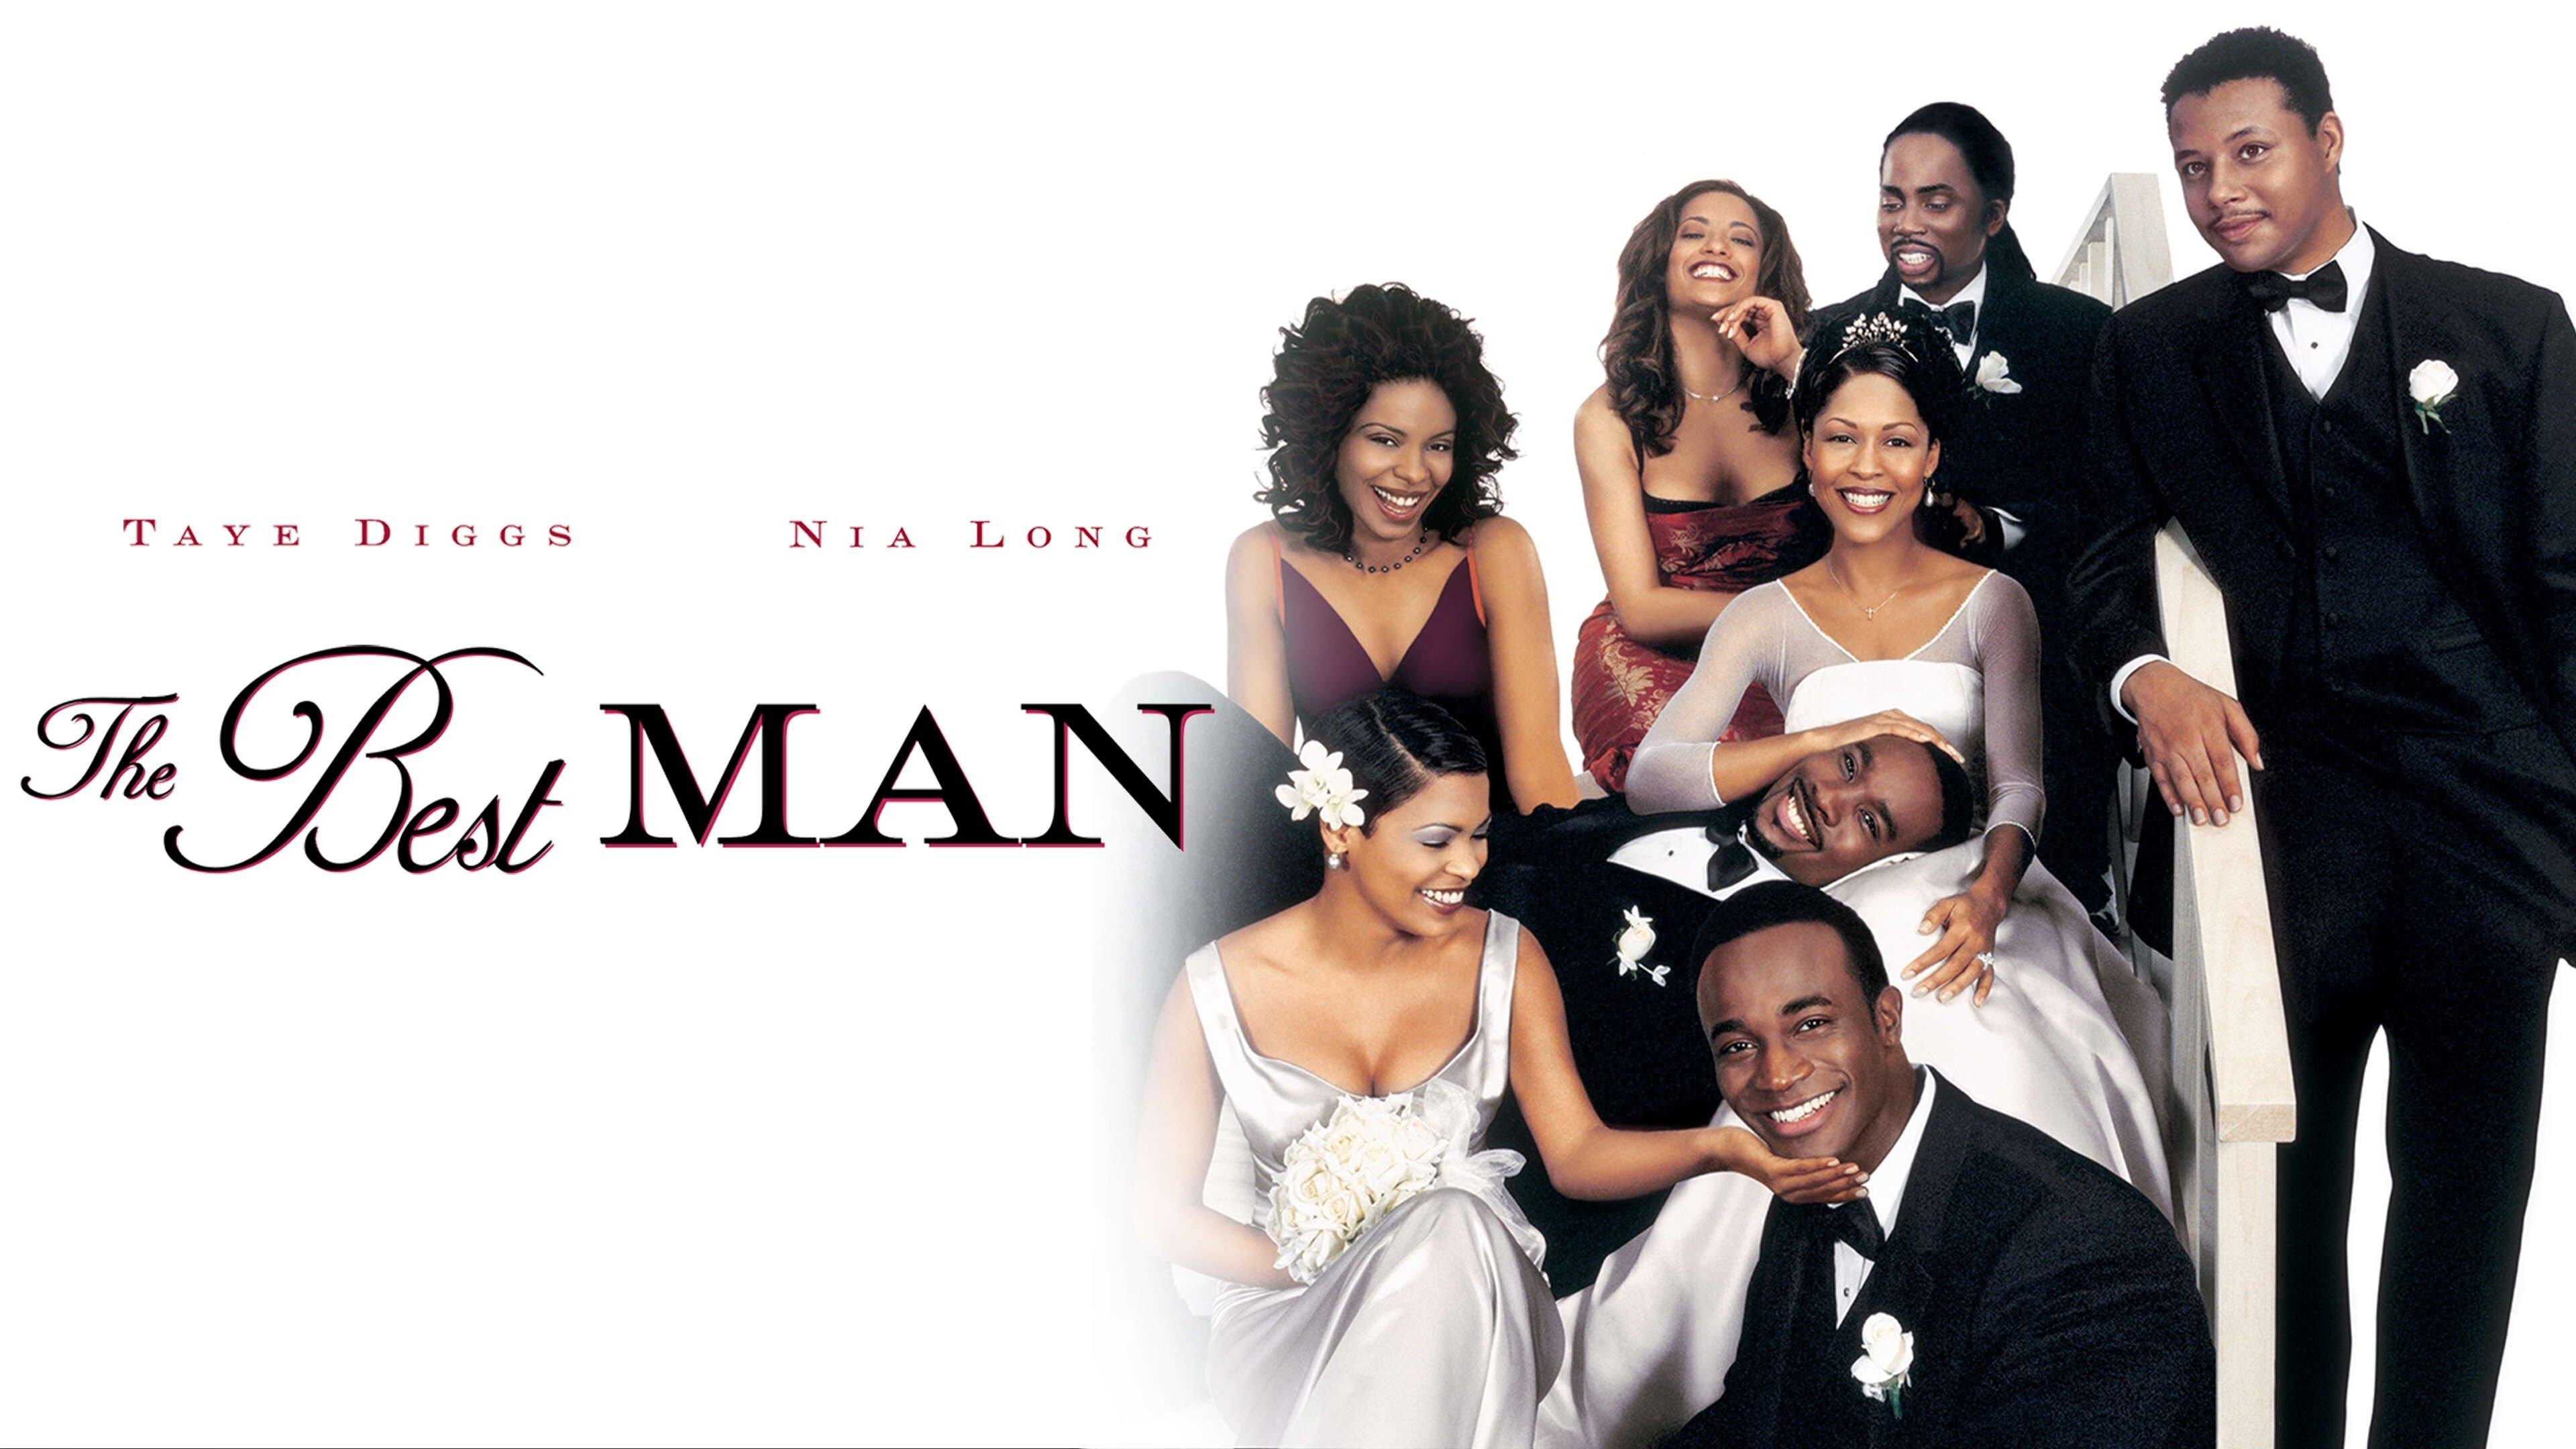 Watch The Best Man Streaming Online on Philo (Free Trial)